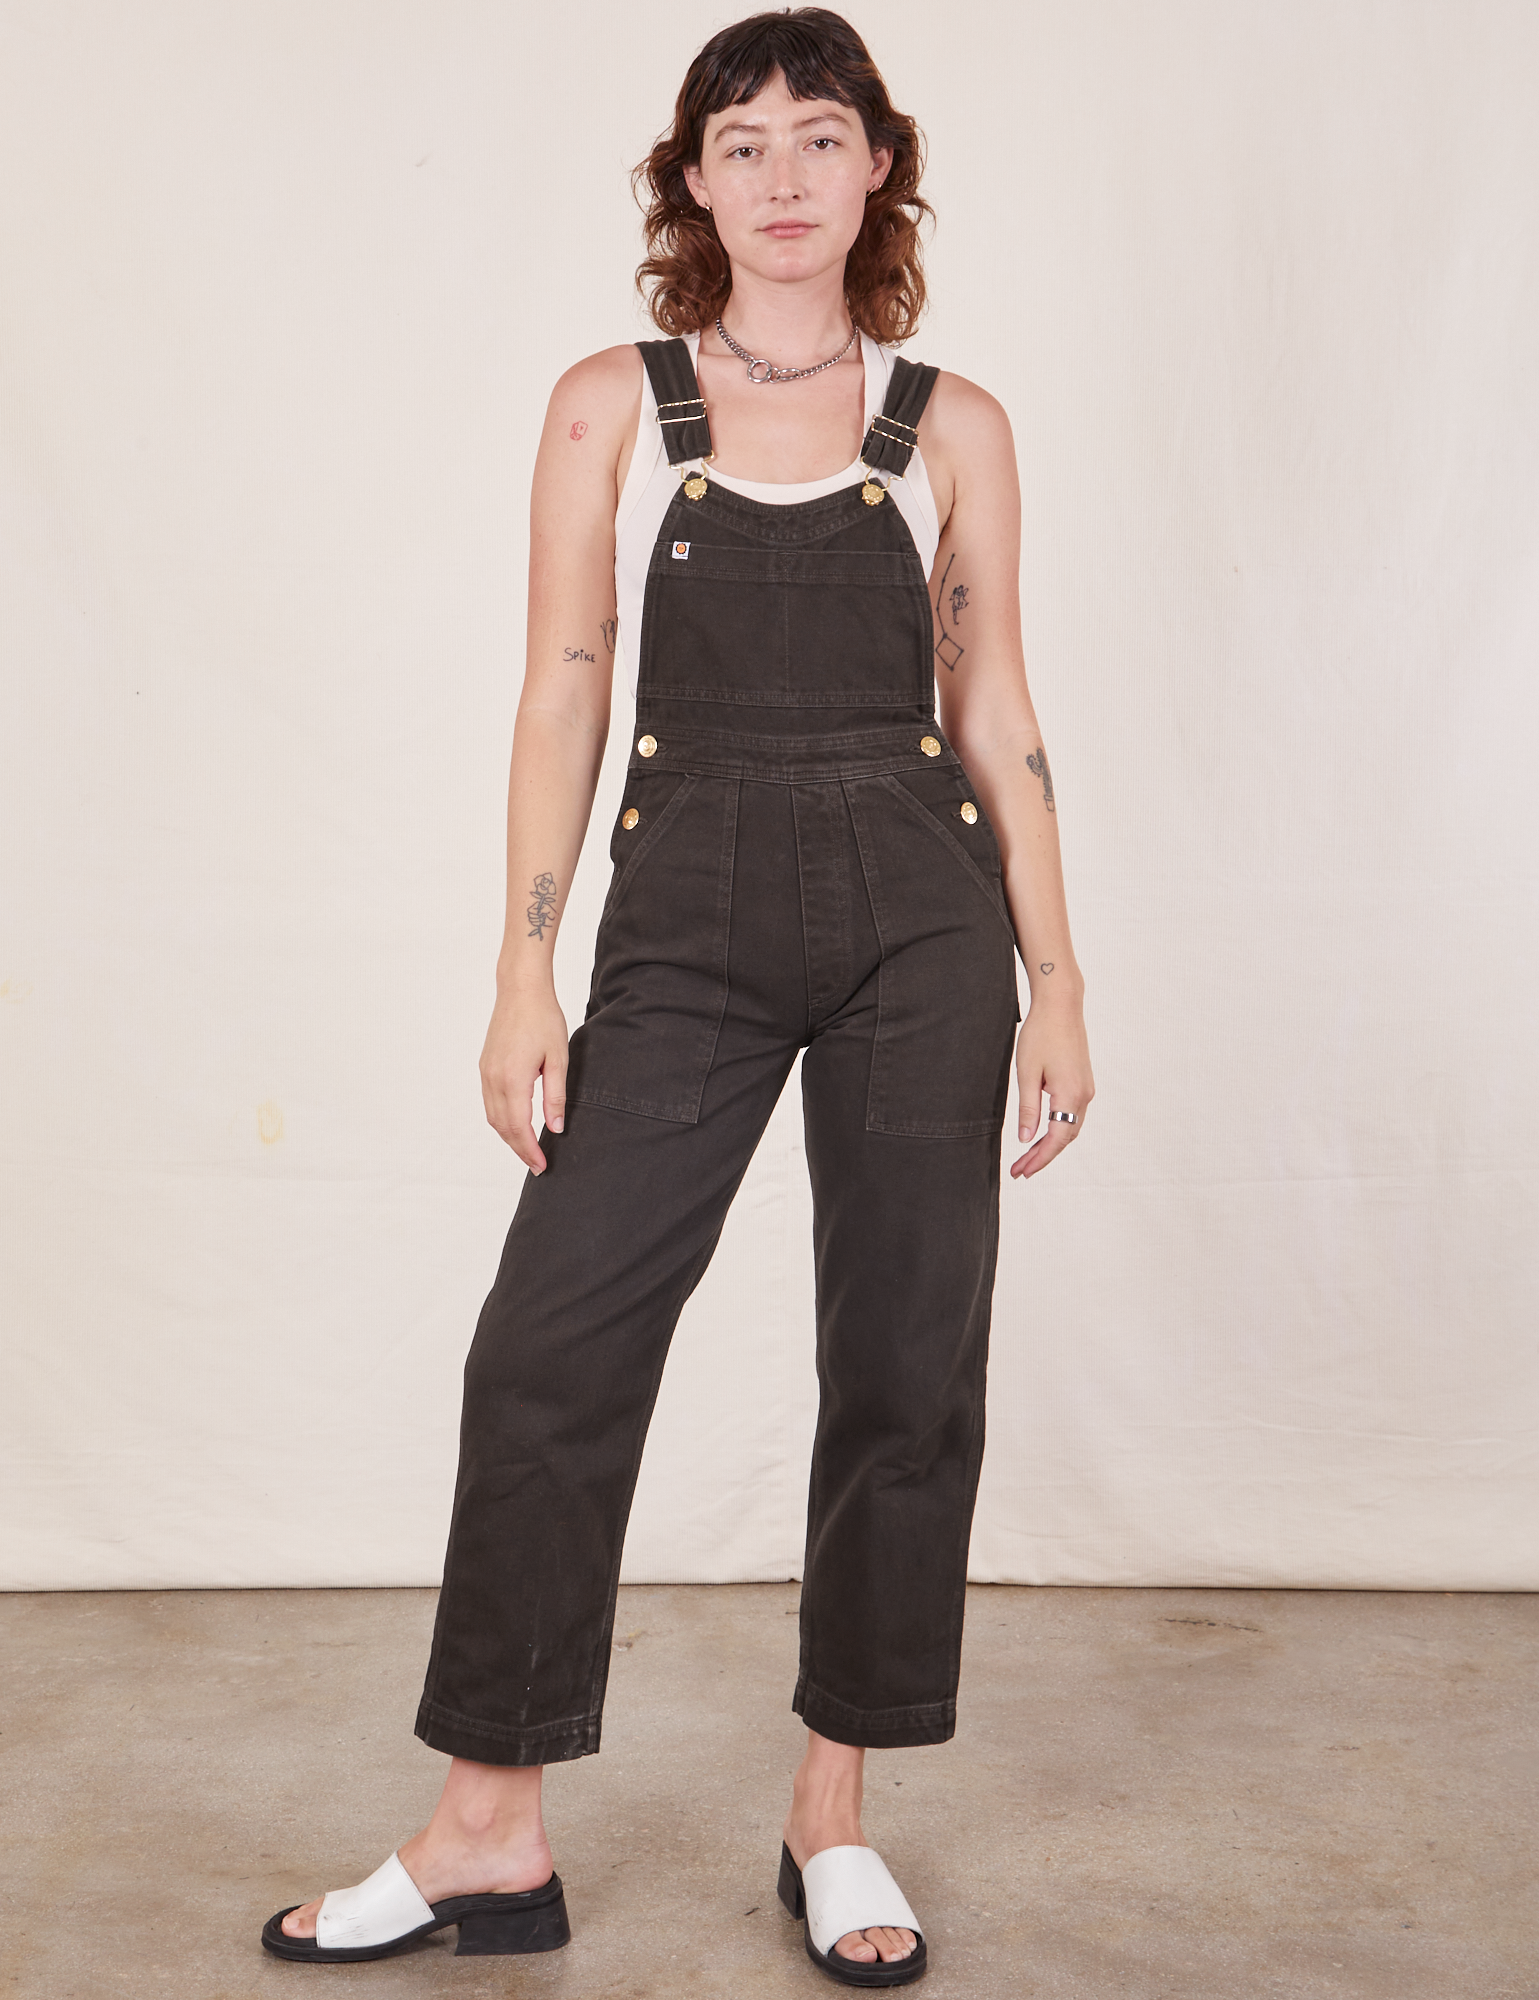 Alex is 5&#39;8&quot;and wearing size P Original Overalls in Mono Espresso with a Cropped Tank Top in vintage tee off-white